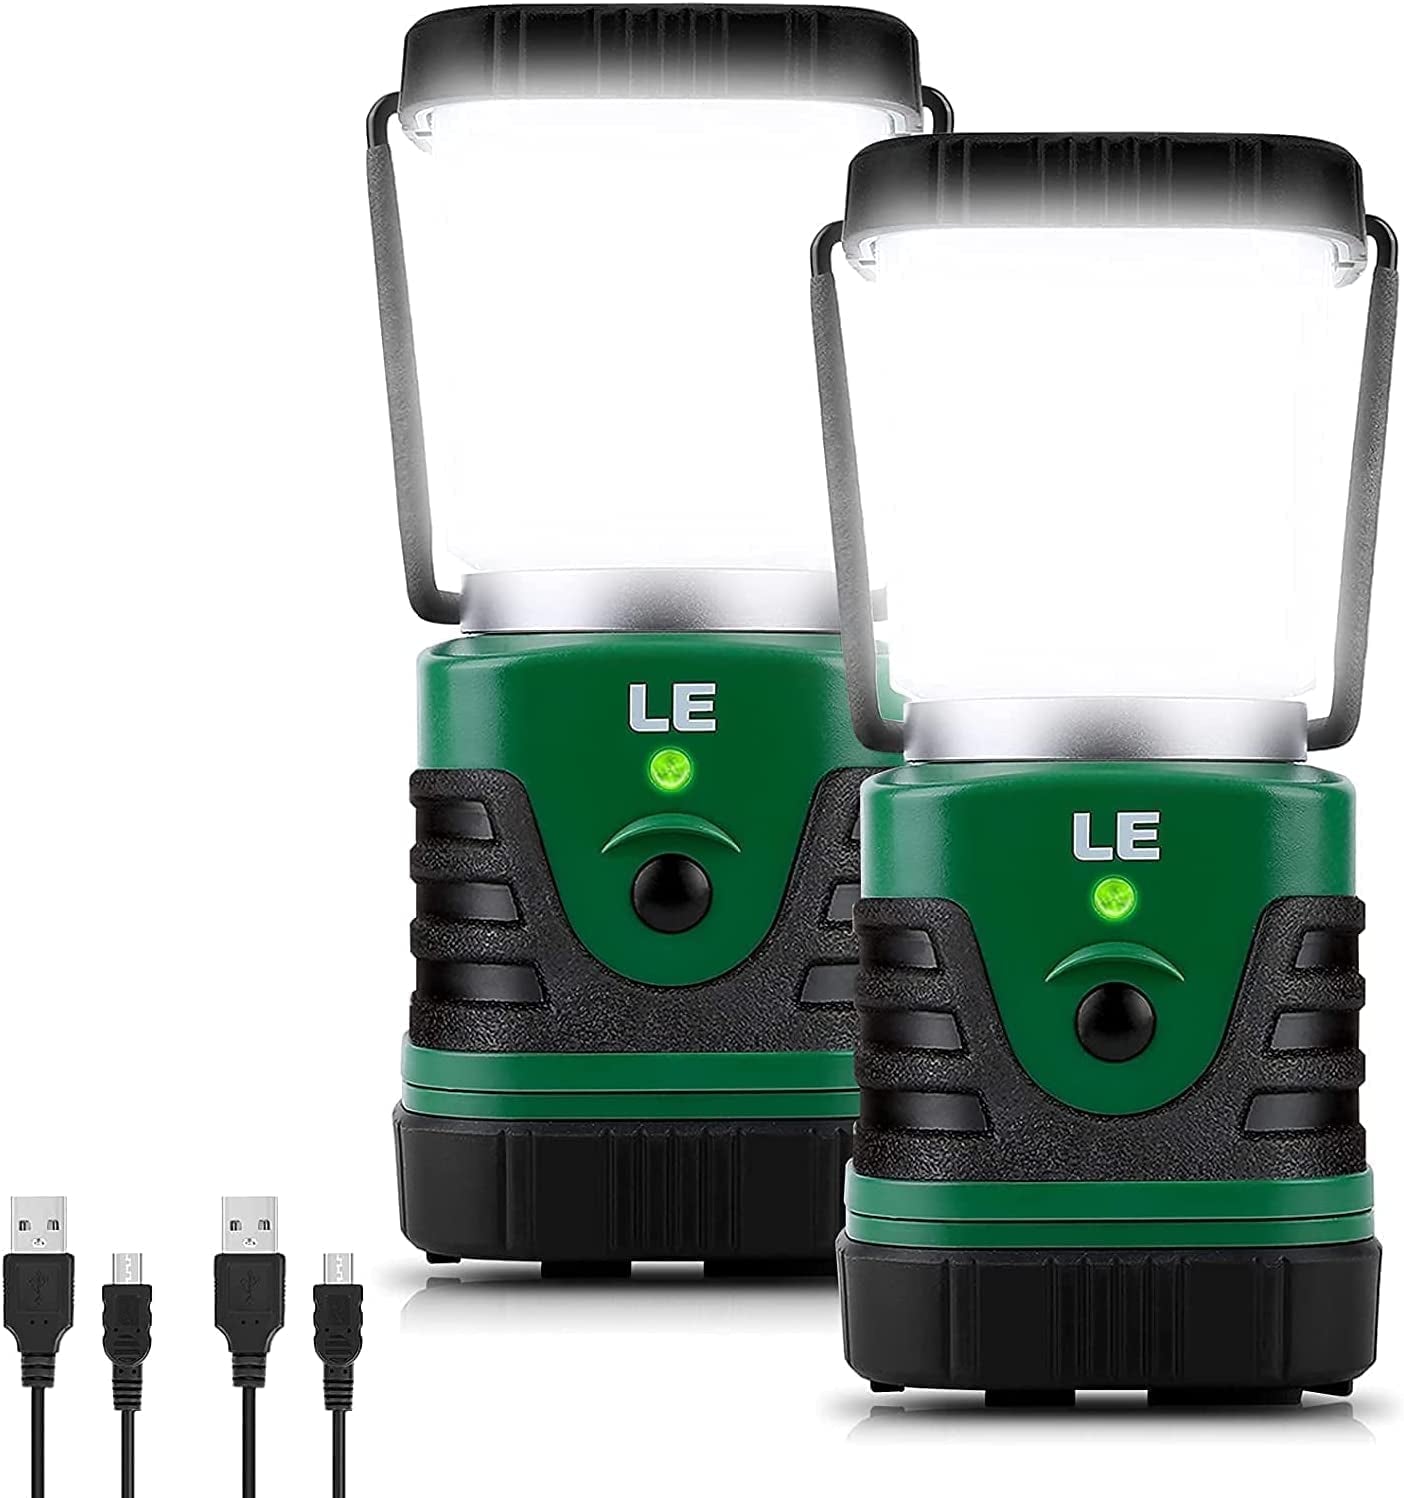 Lighting EVER, LE LED Camping Lantern Rechargeable, 1000LM, 4 Light Modes, 4400Mah Power Bank, IP44 Waterproof, Perfect Lantern Flashlight for Hurricane Emergency, Hiking, Home and More, USB Cable Included